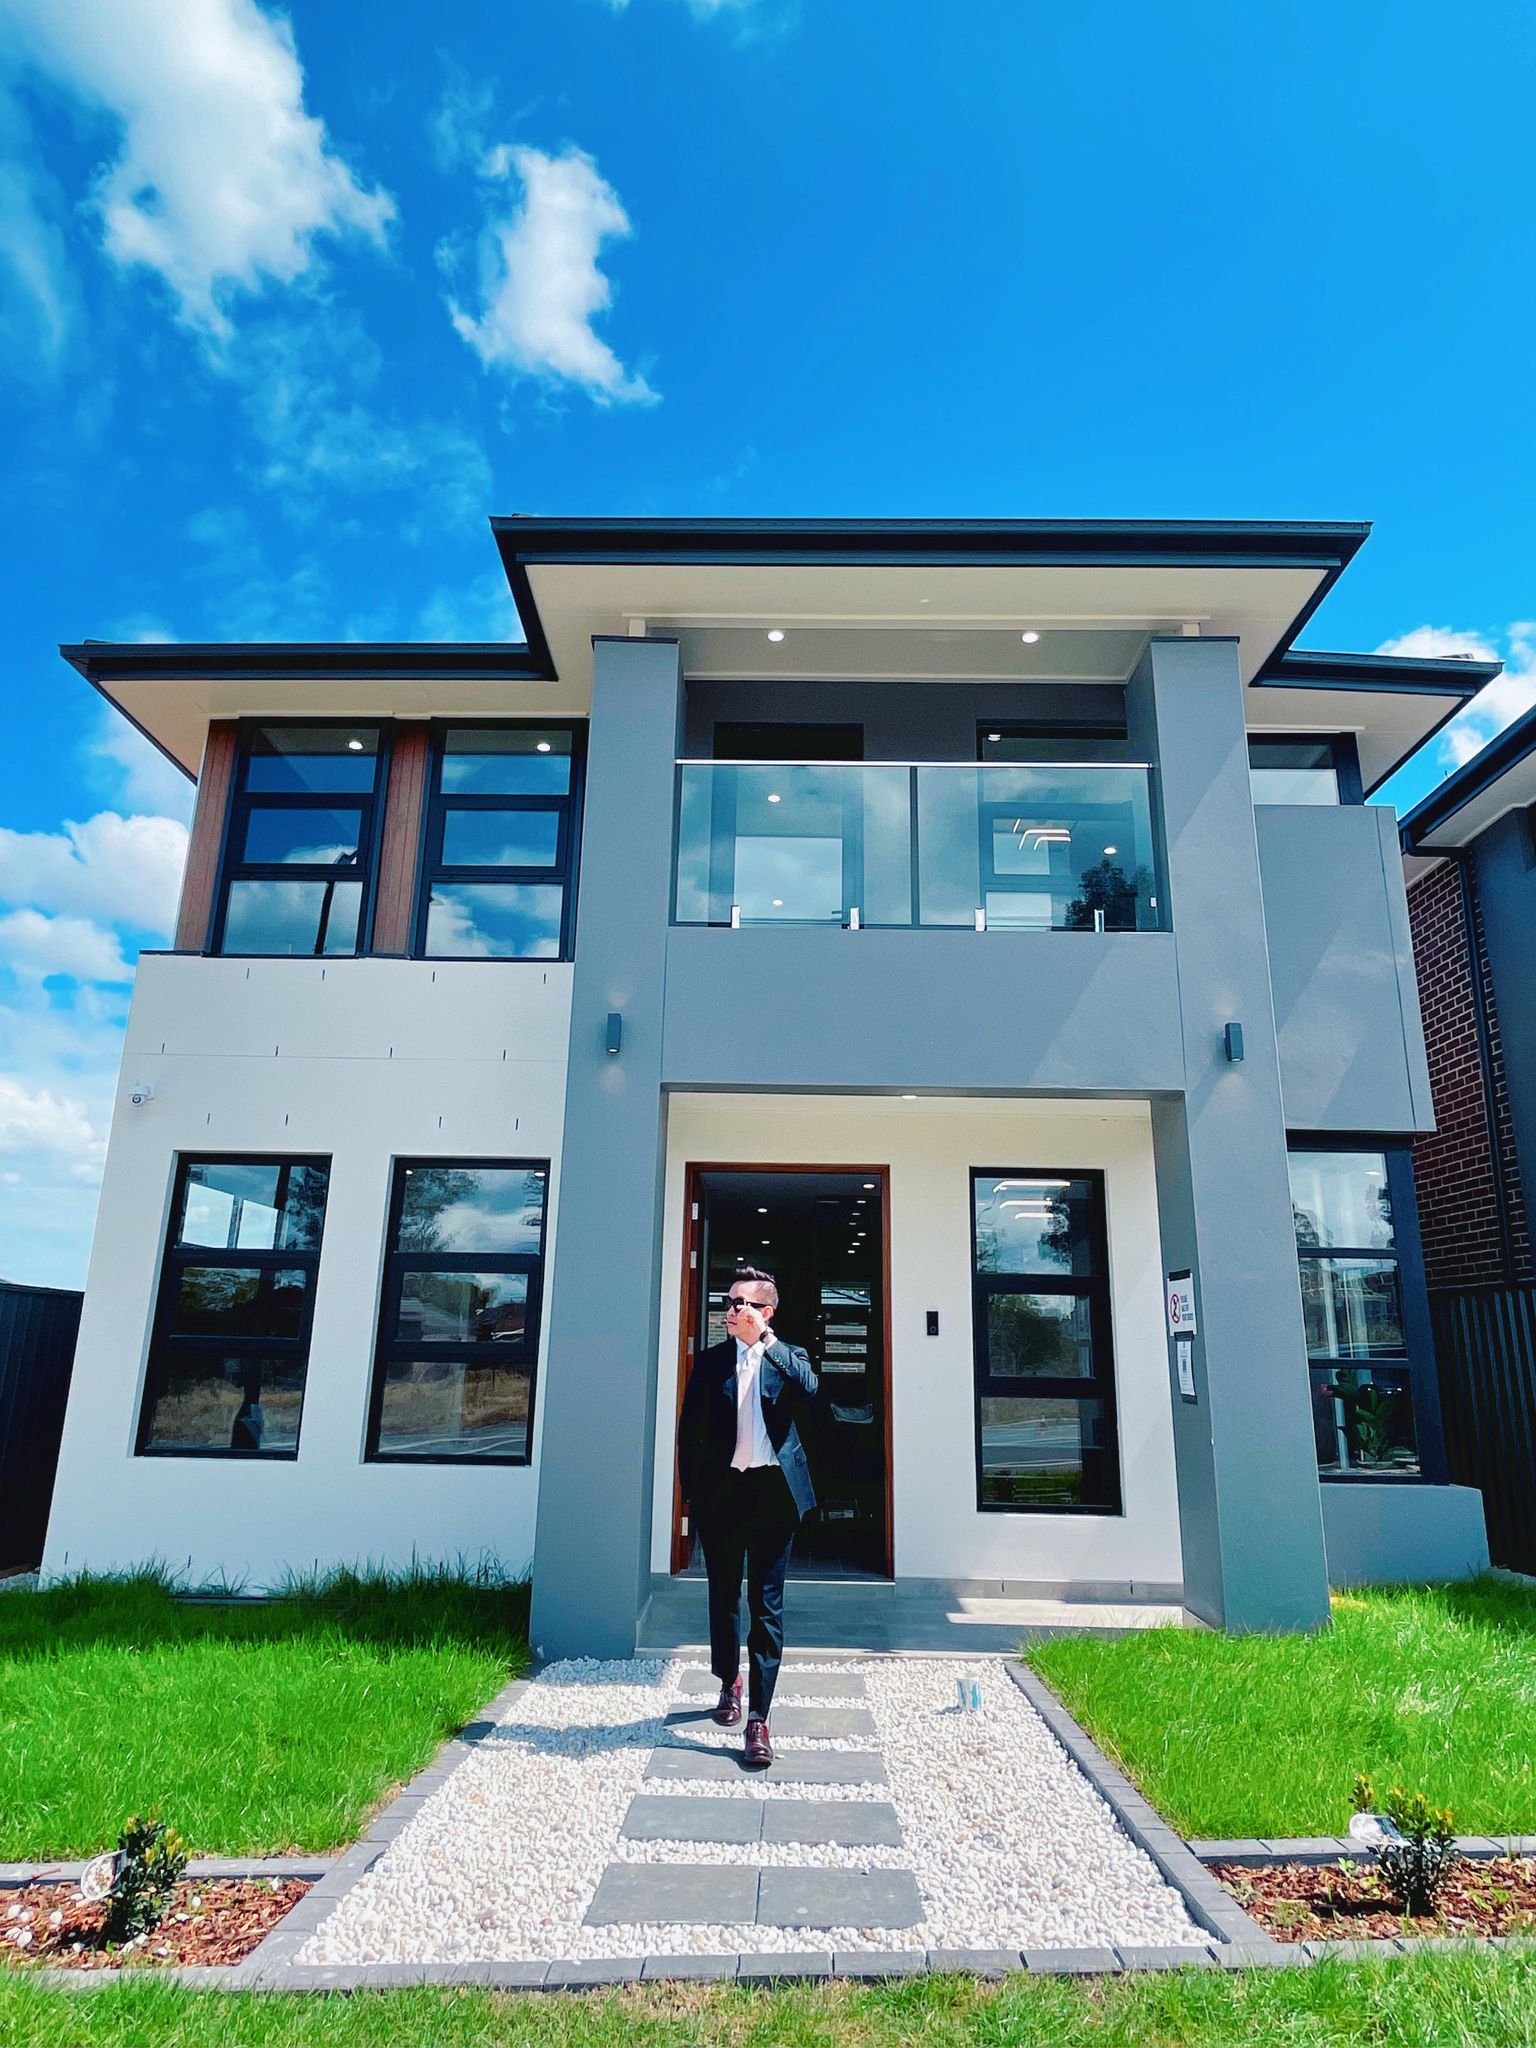 A man in a suit walks in front of a modern-styled home